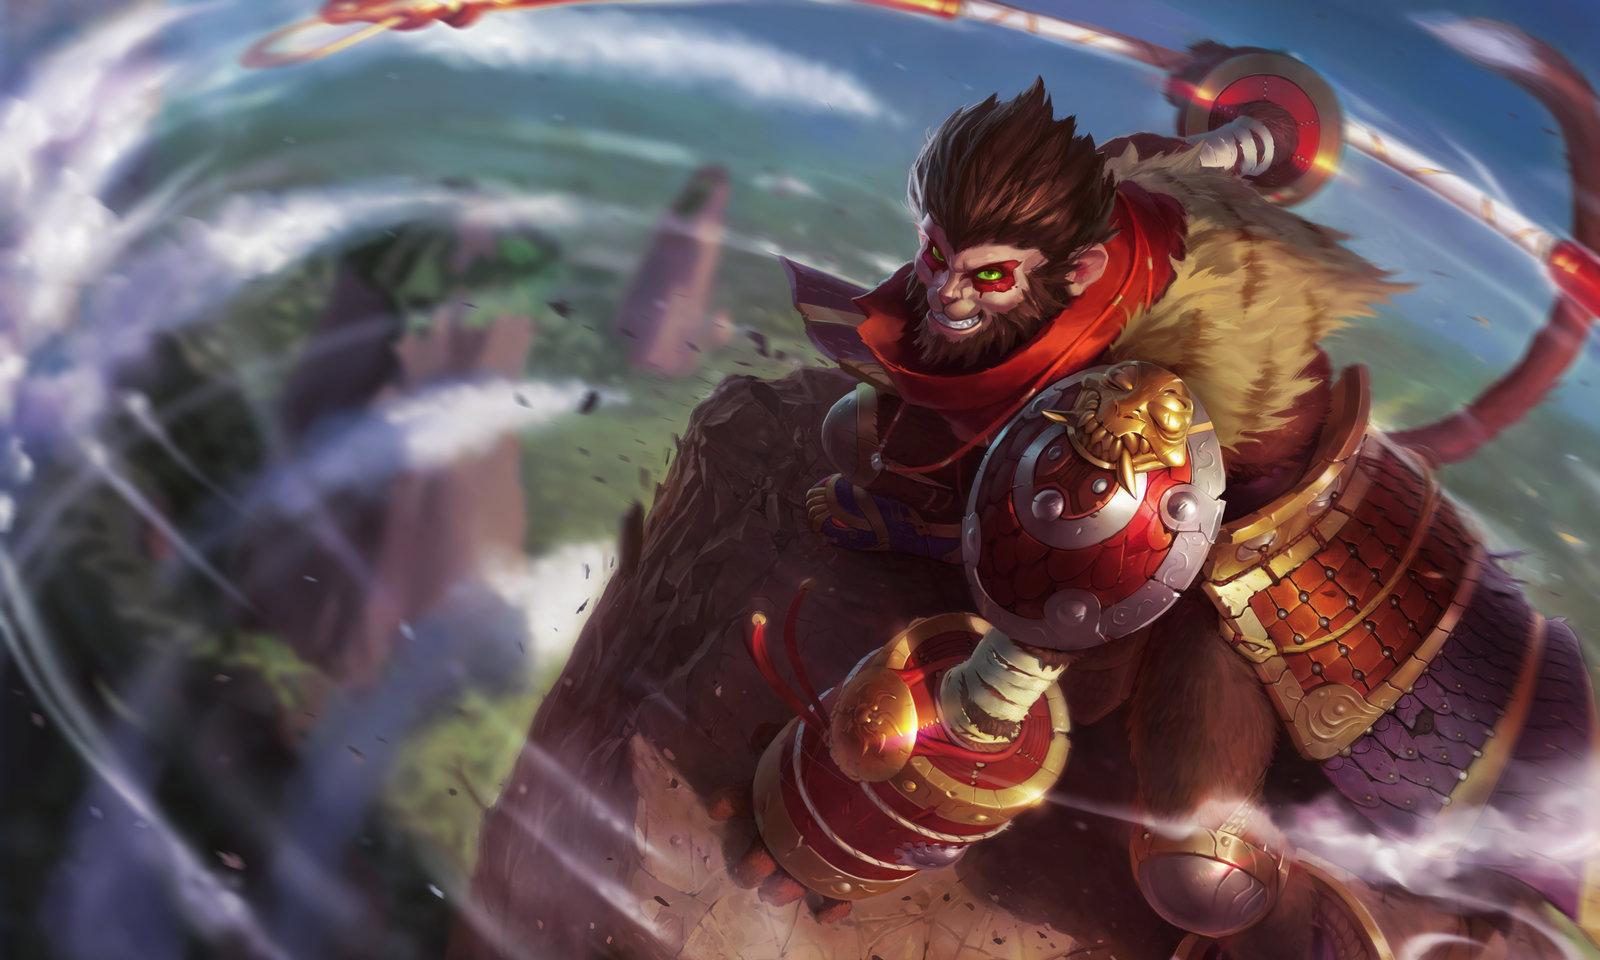 Wukong lands on the Rift too strong